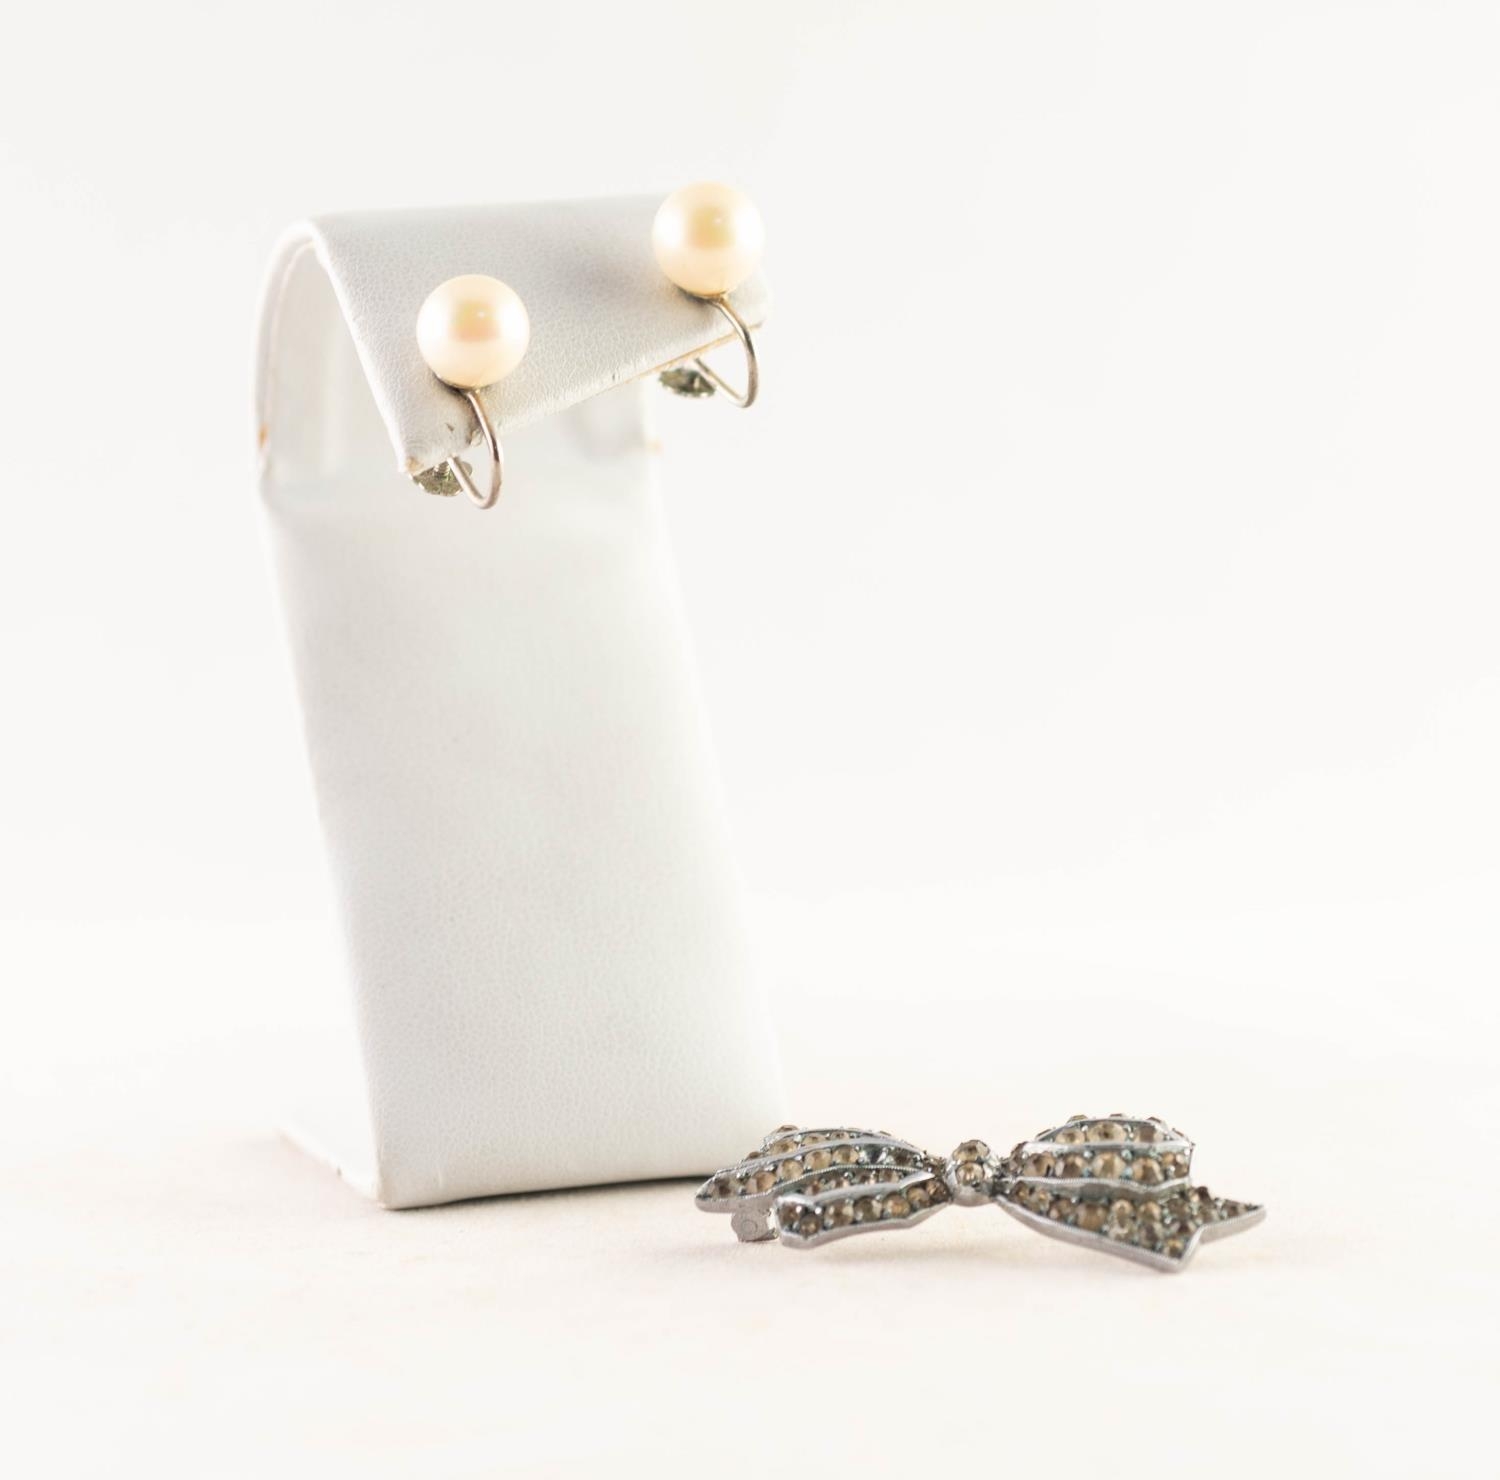 PAIR OF .830 PURITY SILVER AND CULTURED PEARL SET EARRINGS, and a white metal and paste-set